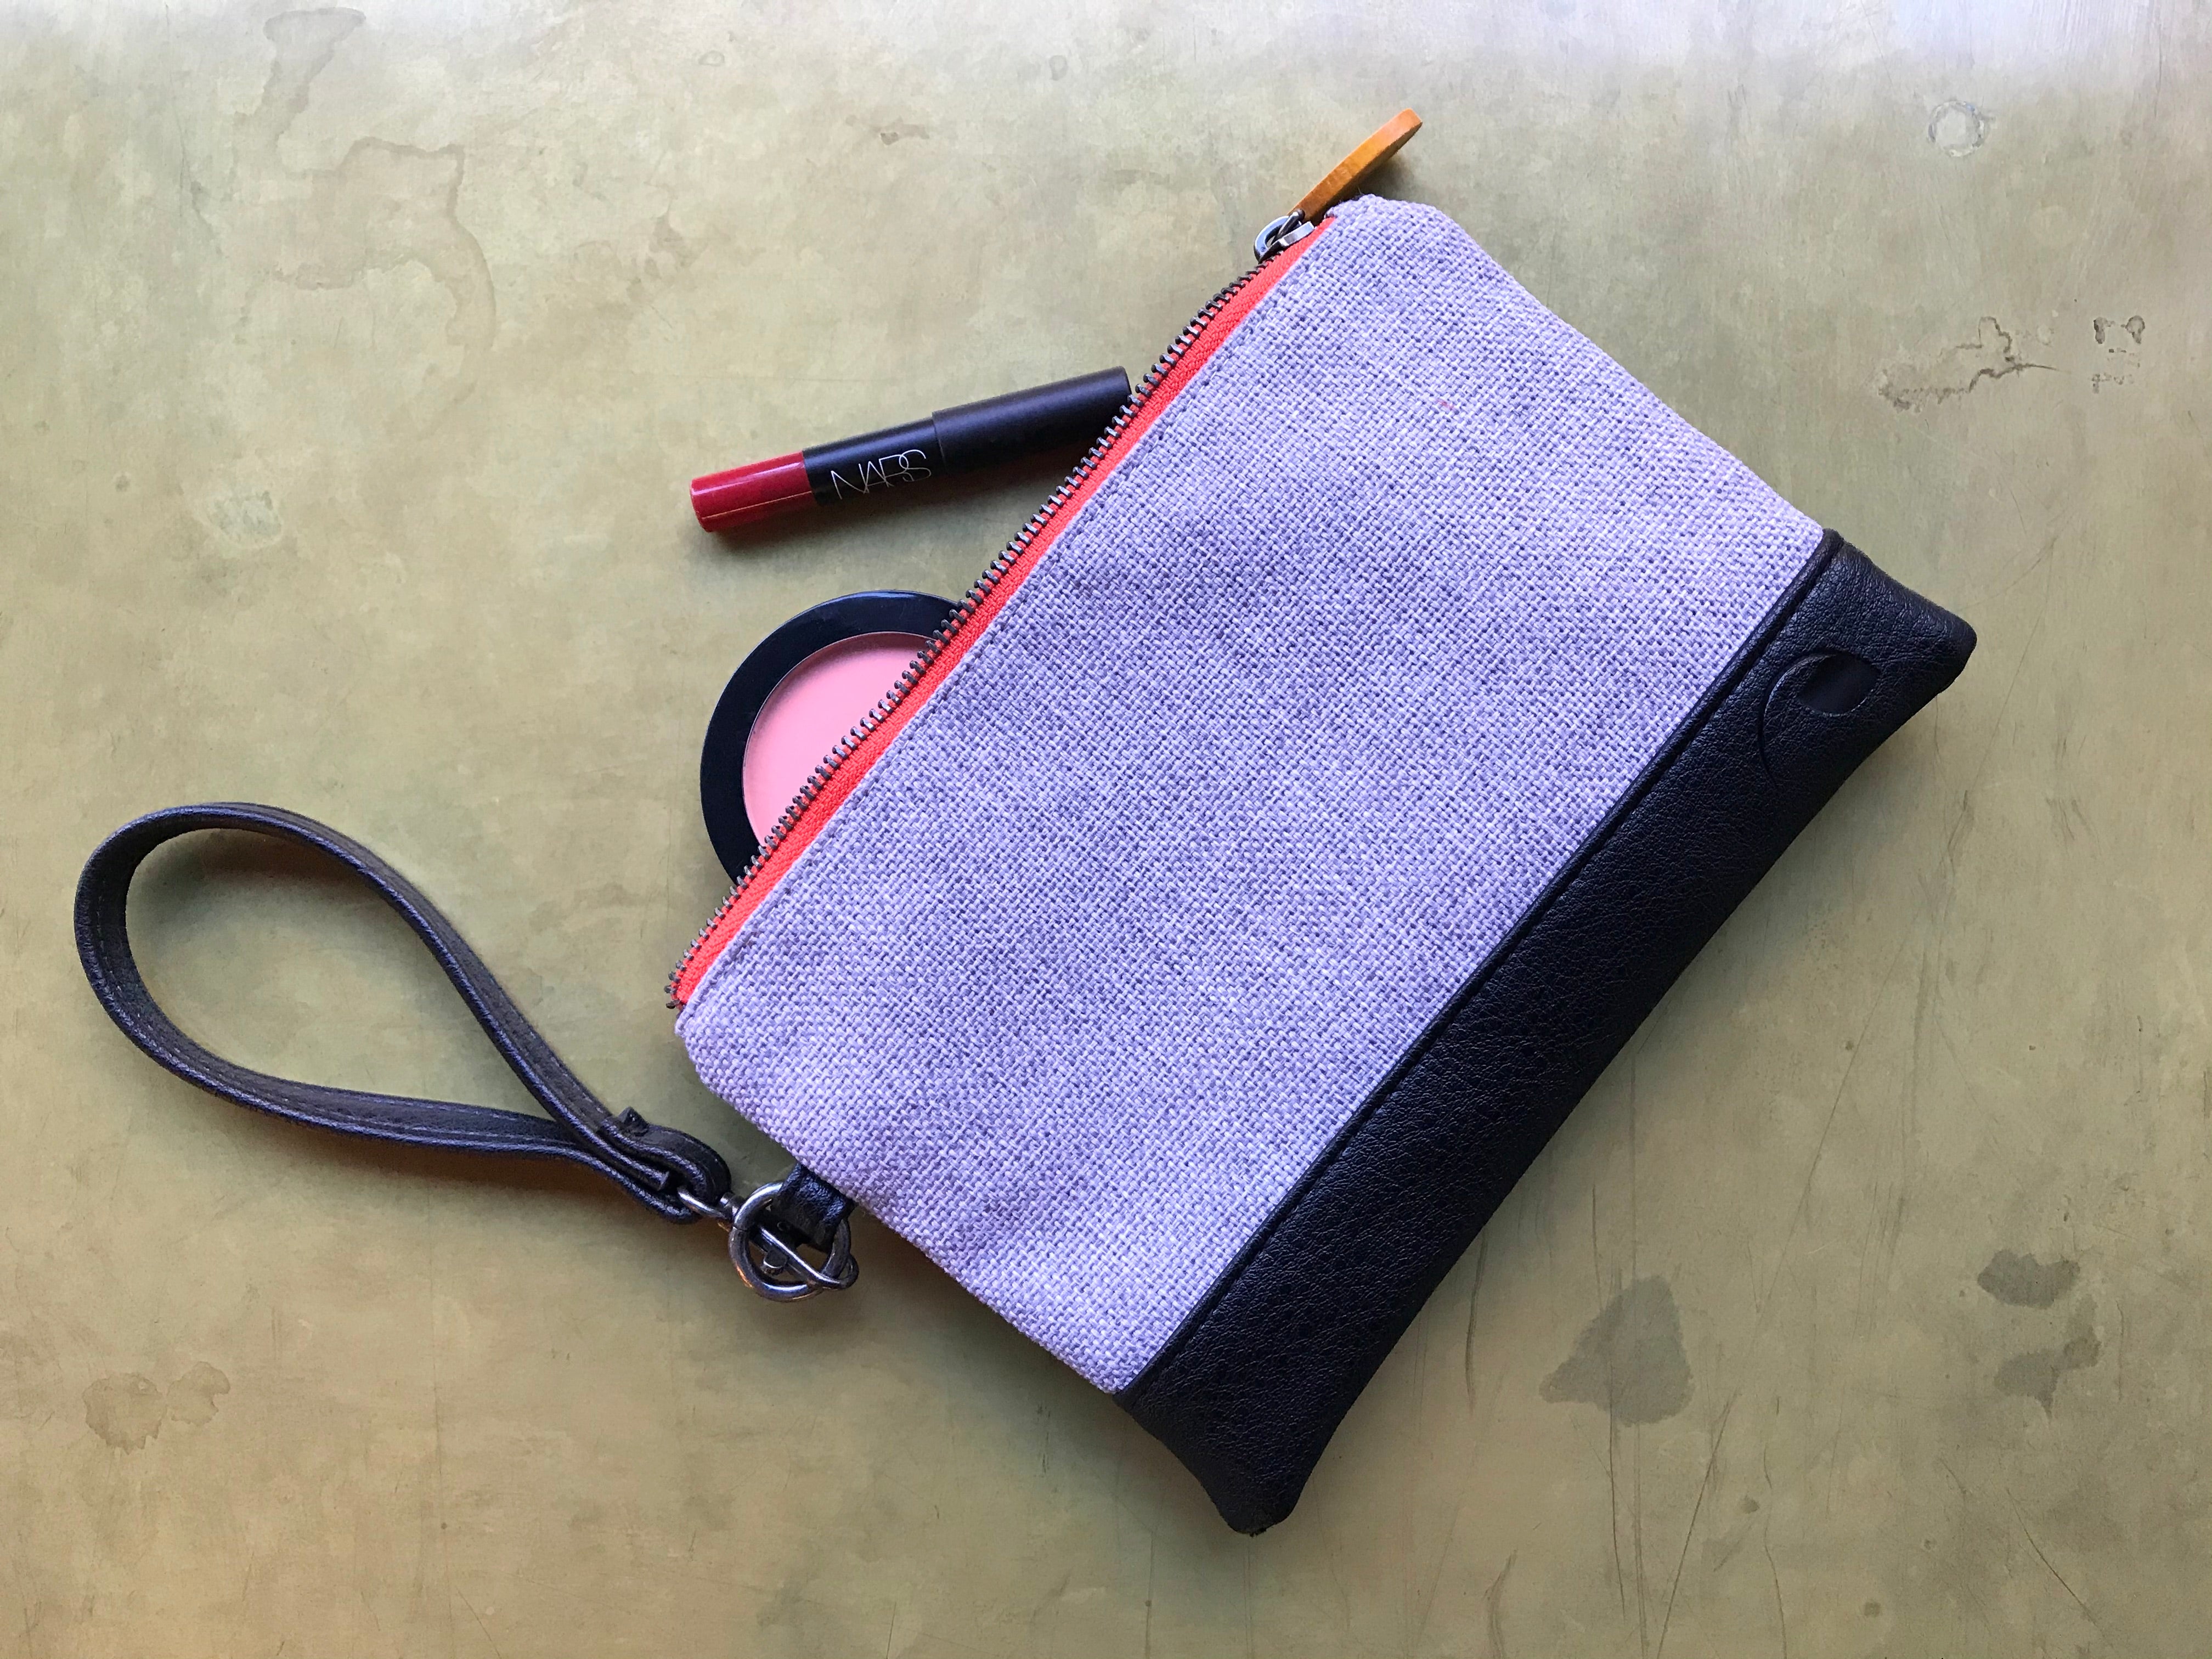 Chic & versatile! Gowanus Wristlet is a wallet, phone holder & passport case. Fits iPhone & Galaxy. Vegan leather, zippered pockets, bright lining. Travel & everyday style. Shop now!